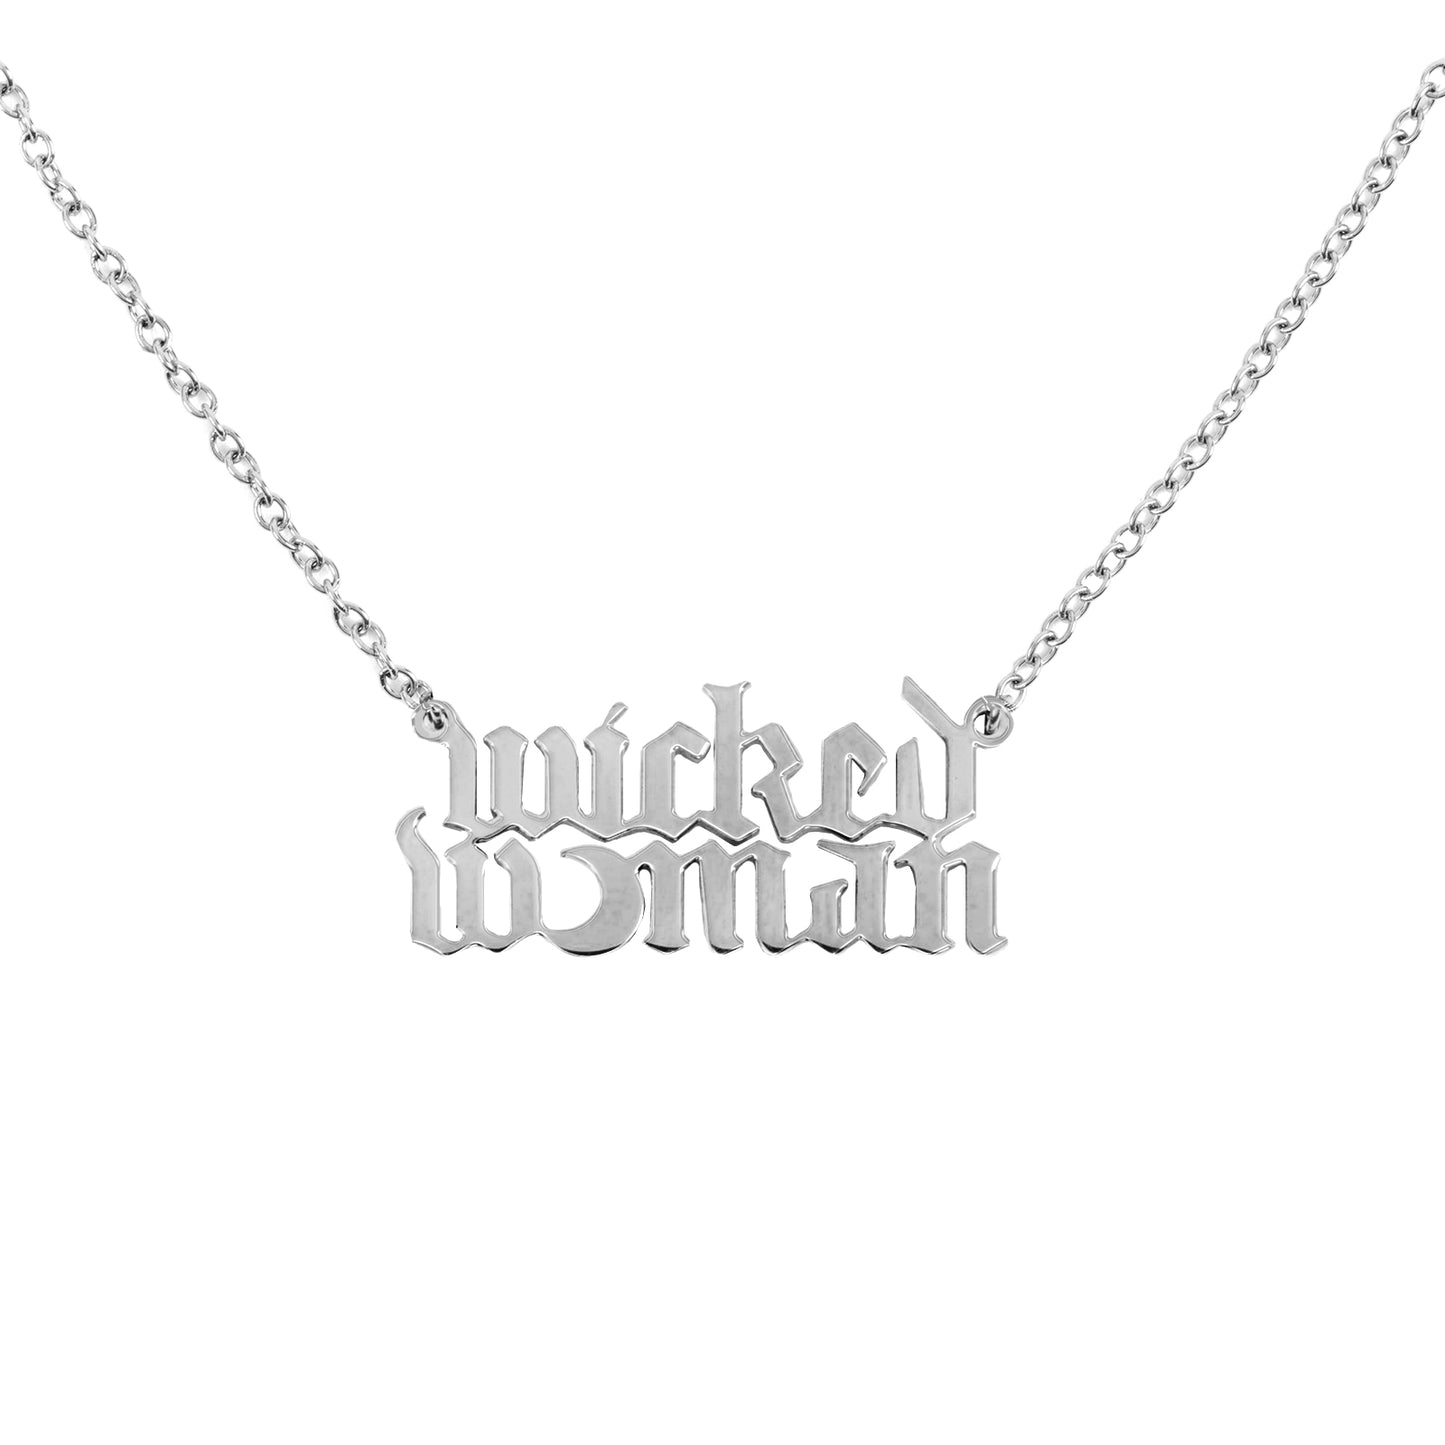 Wicked Woman Stering Silver Necklace